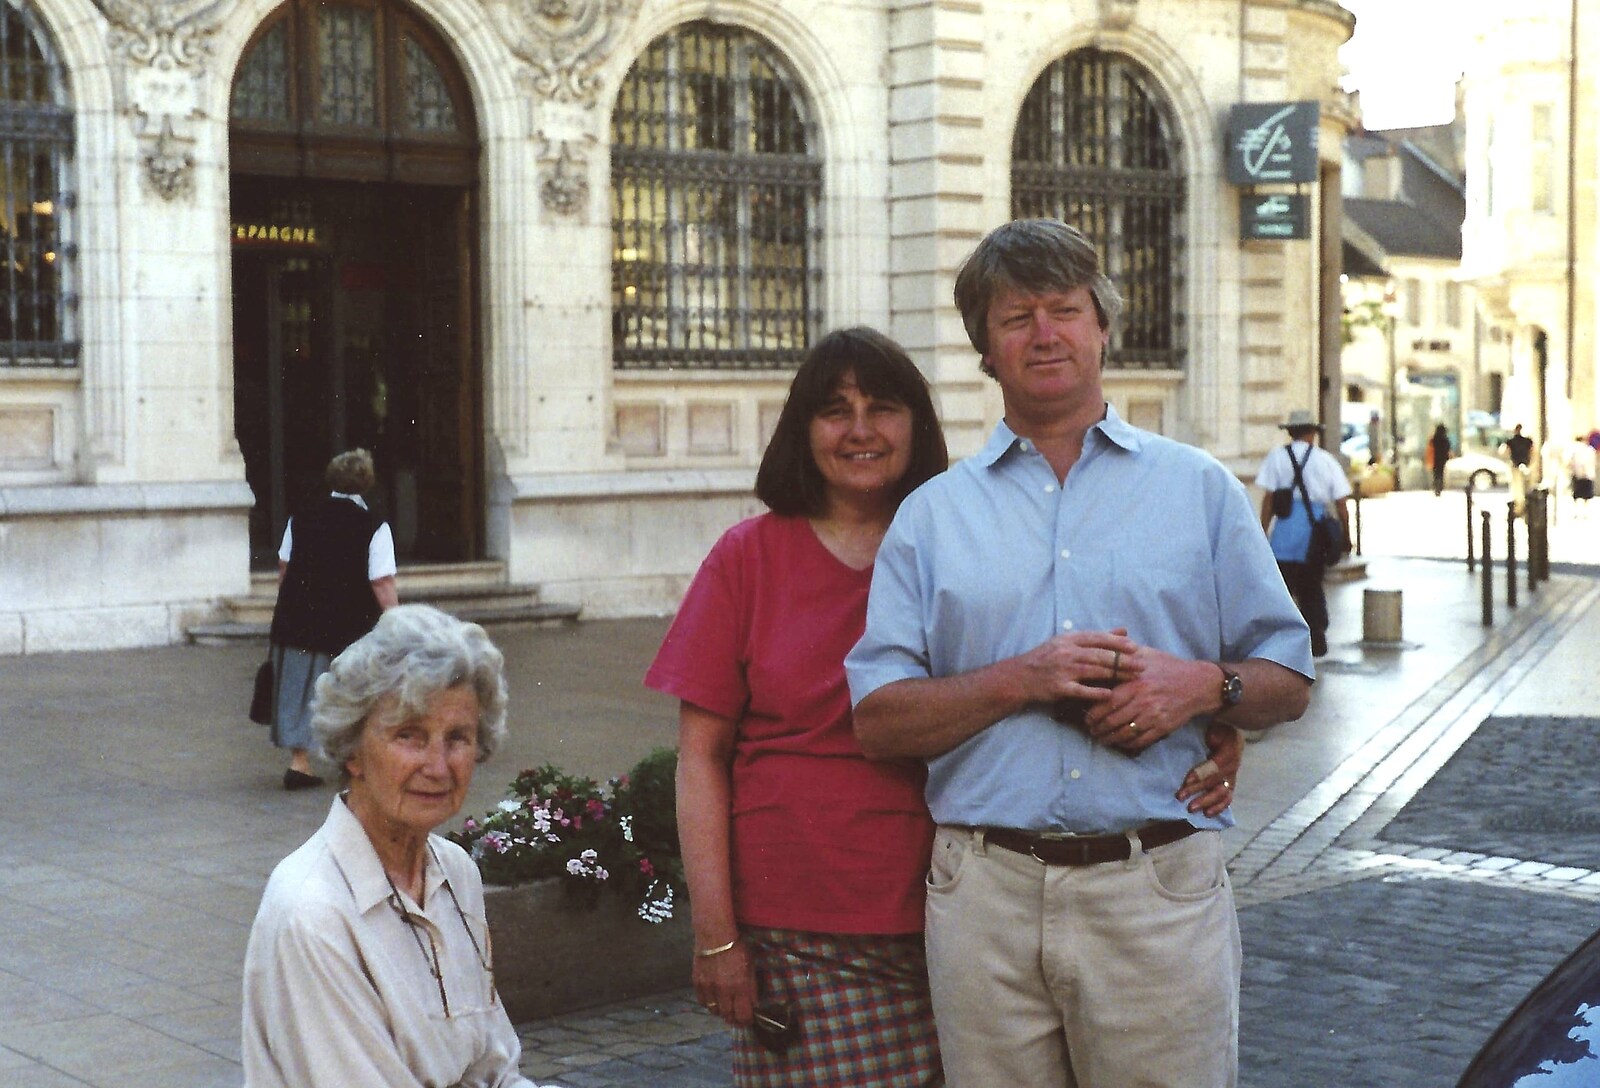 Grandmother, Caroline and Neil from A Short Holiday in Chivres, Burgundy, France - 21st July 2001